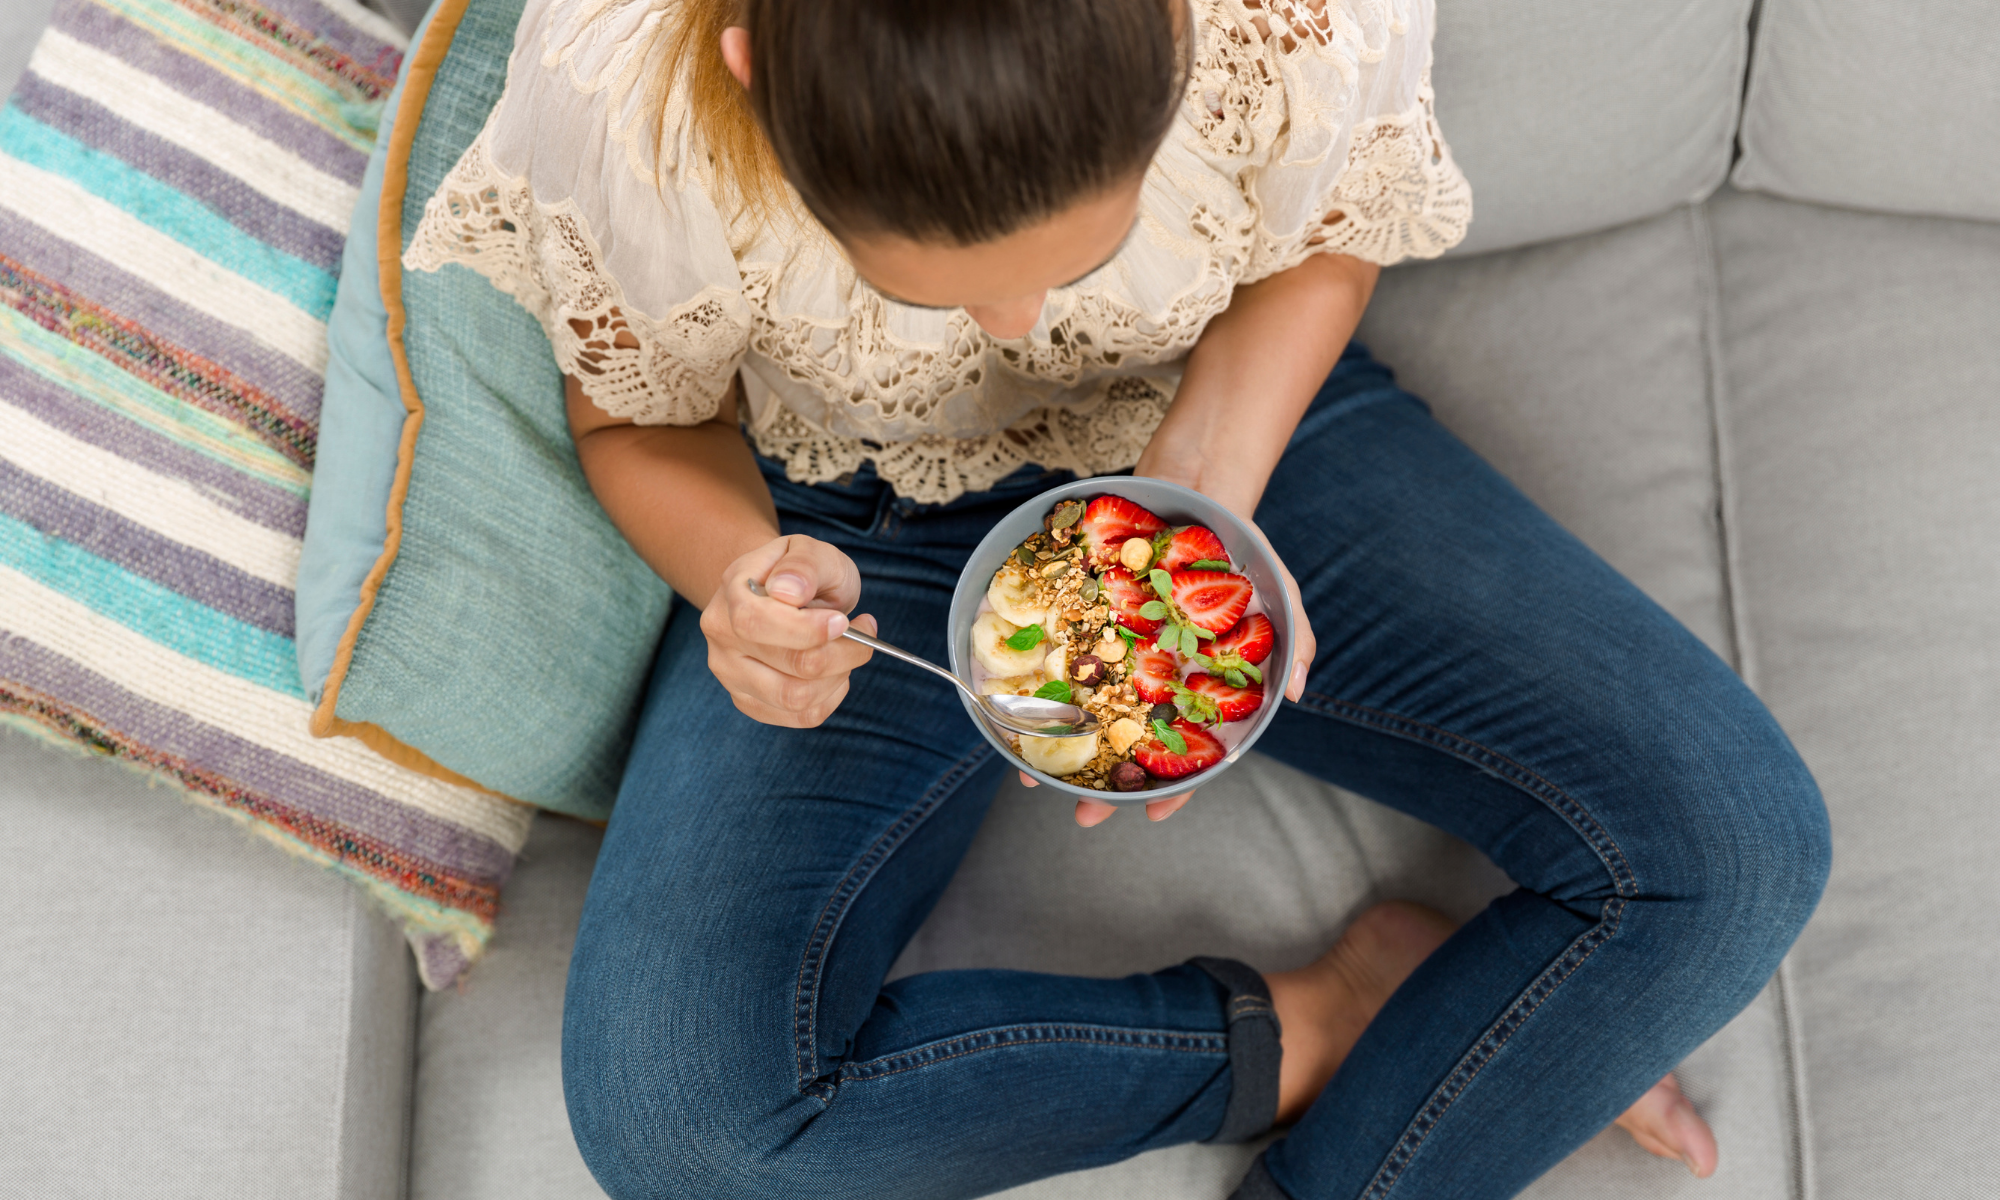 Woman on couch eating a bowl of various fruits and nuts